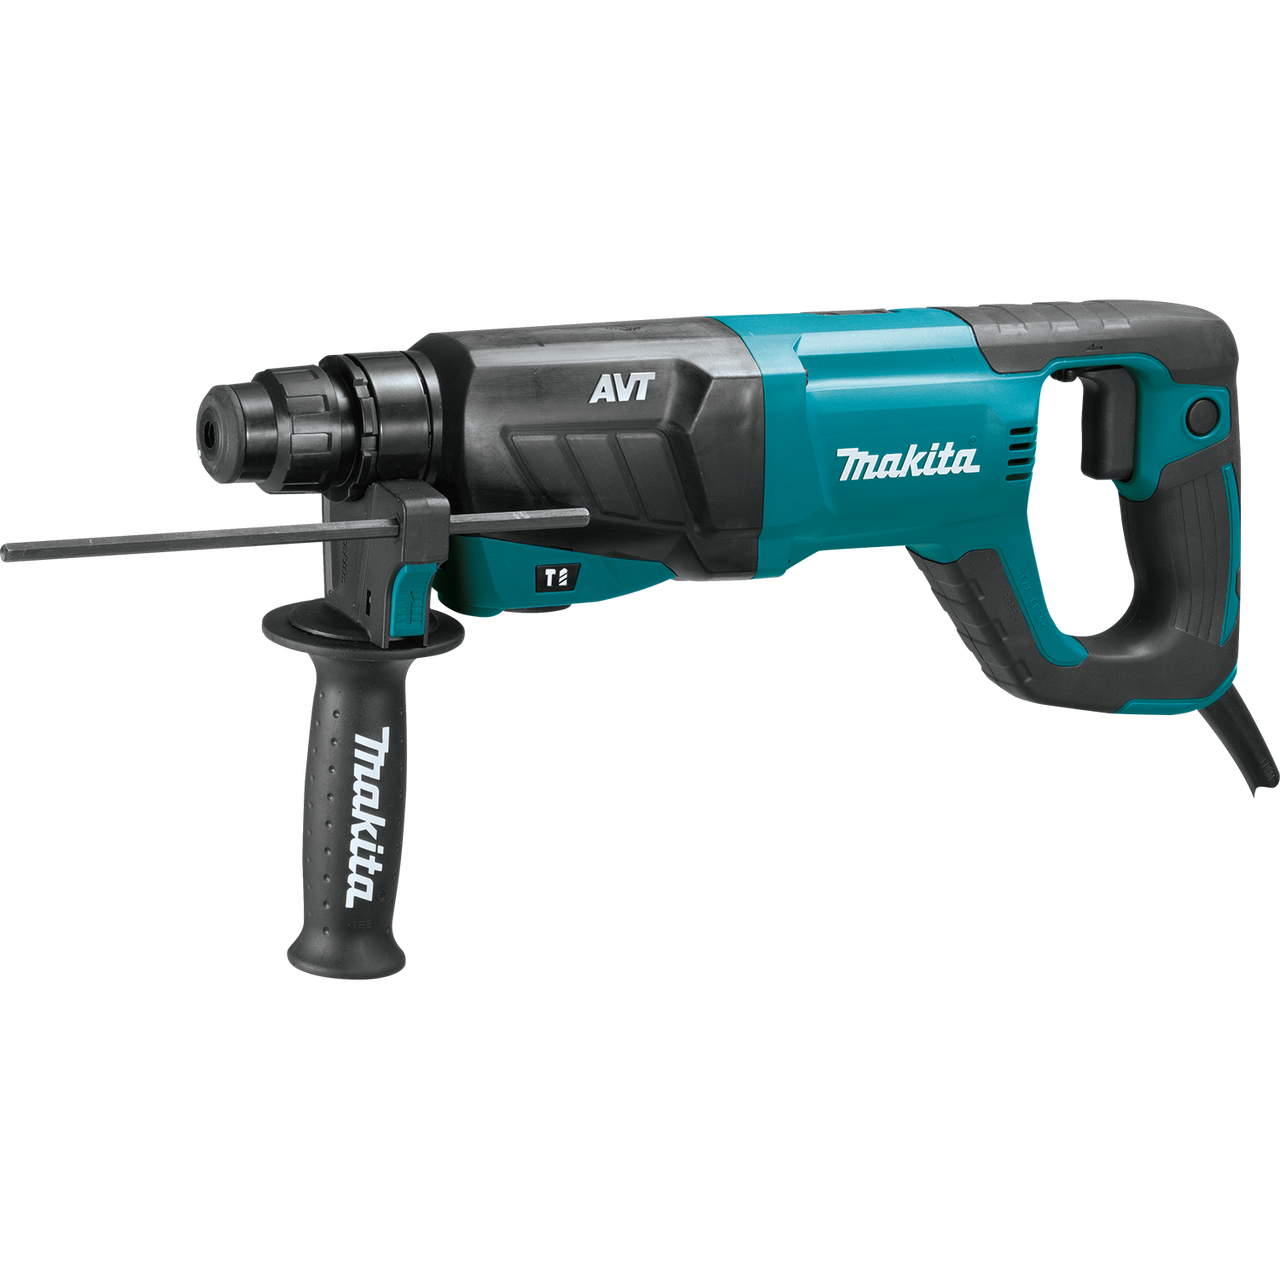 1" AVT? Rotary Hammer, accepts SDS-PLUS bits (D-handle) and 4-1/2" Angle Grinder, HR2641X1